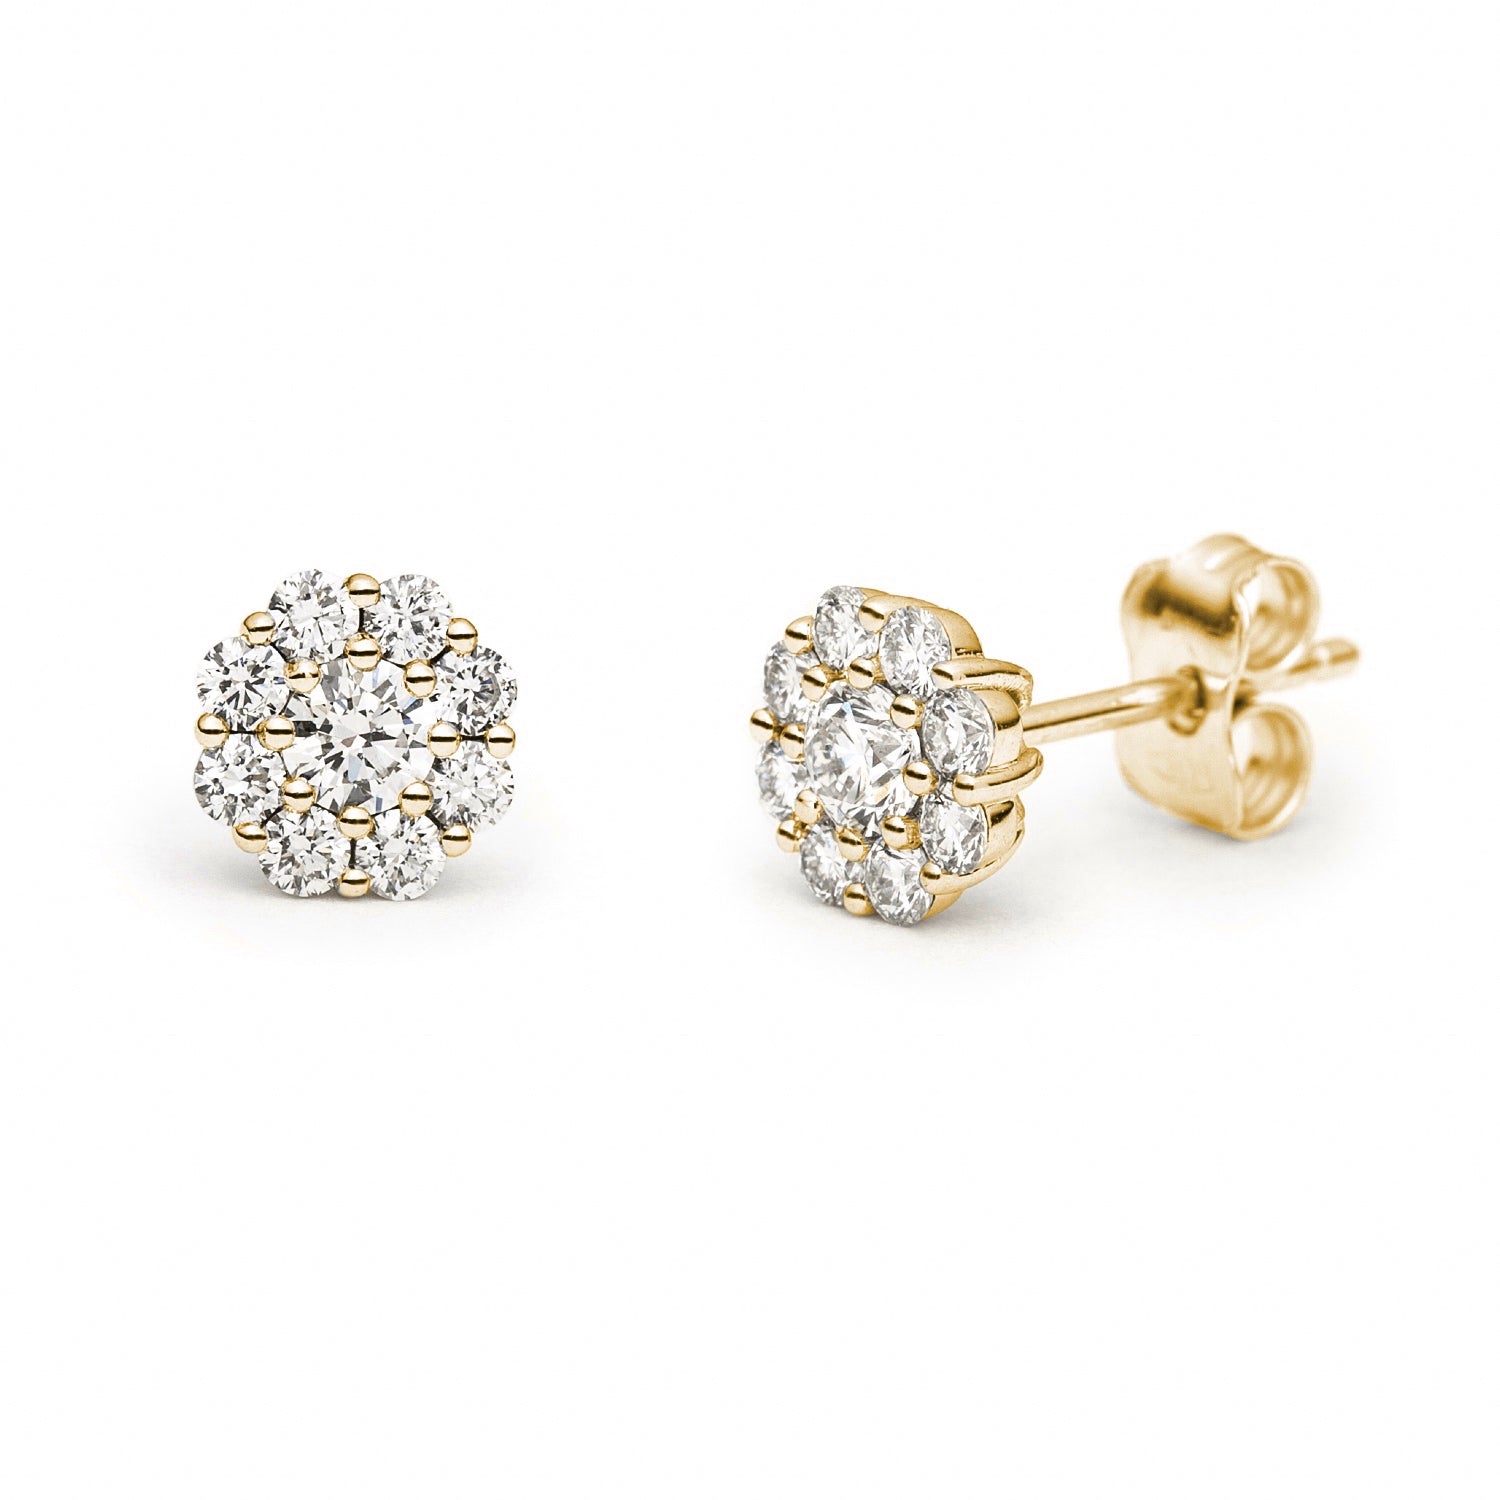 Round Brilliant Cut Diamond Floral Cluster Stud Earrings in Yellow Gold